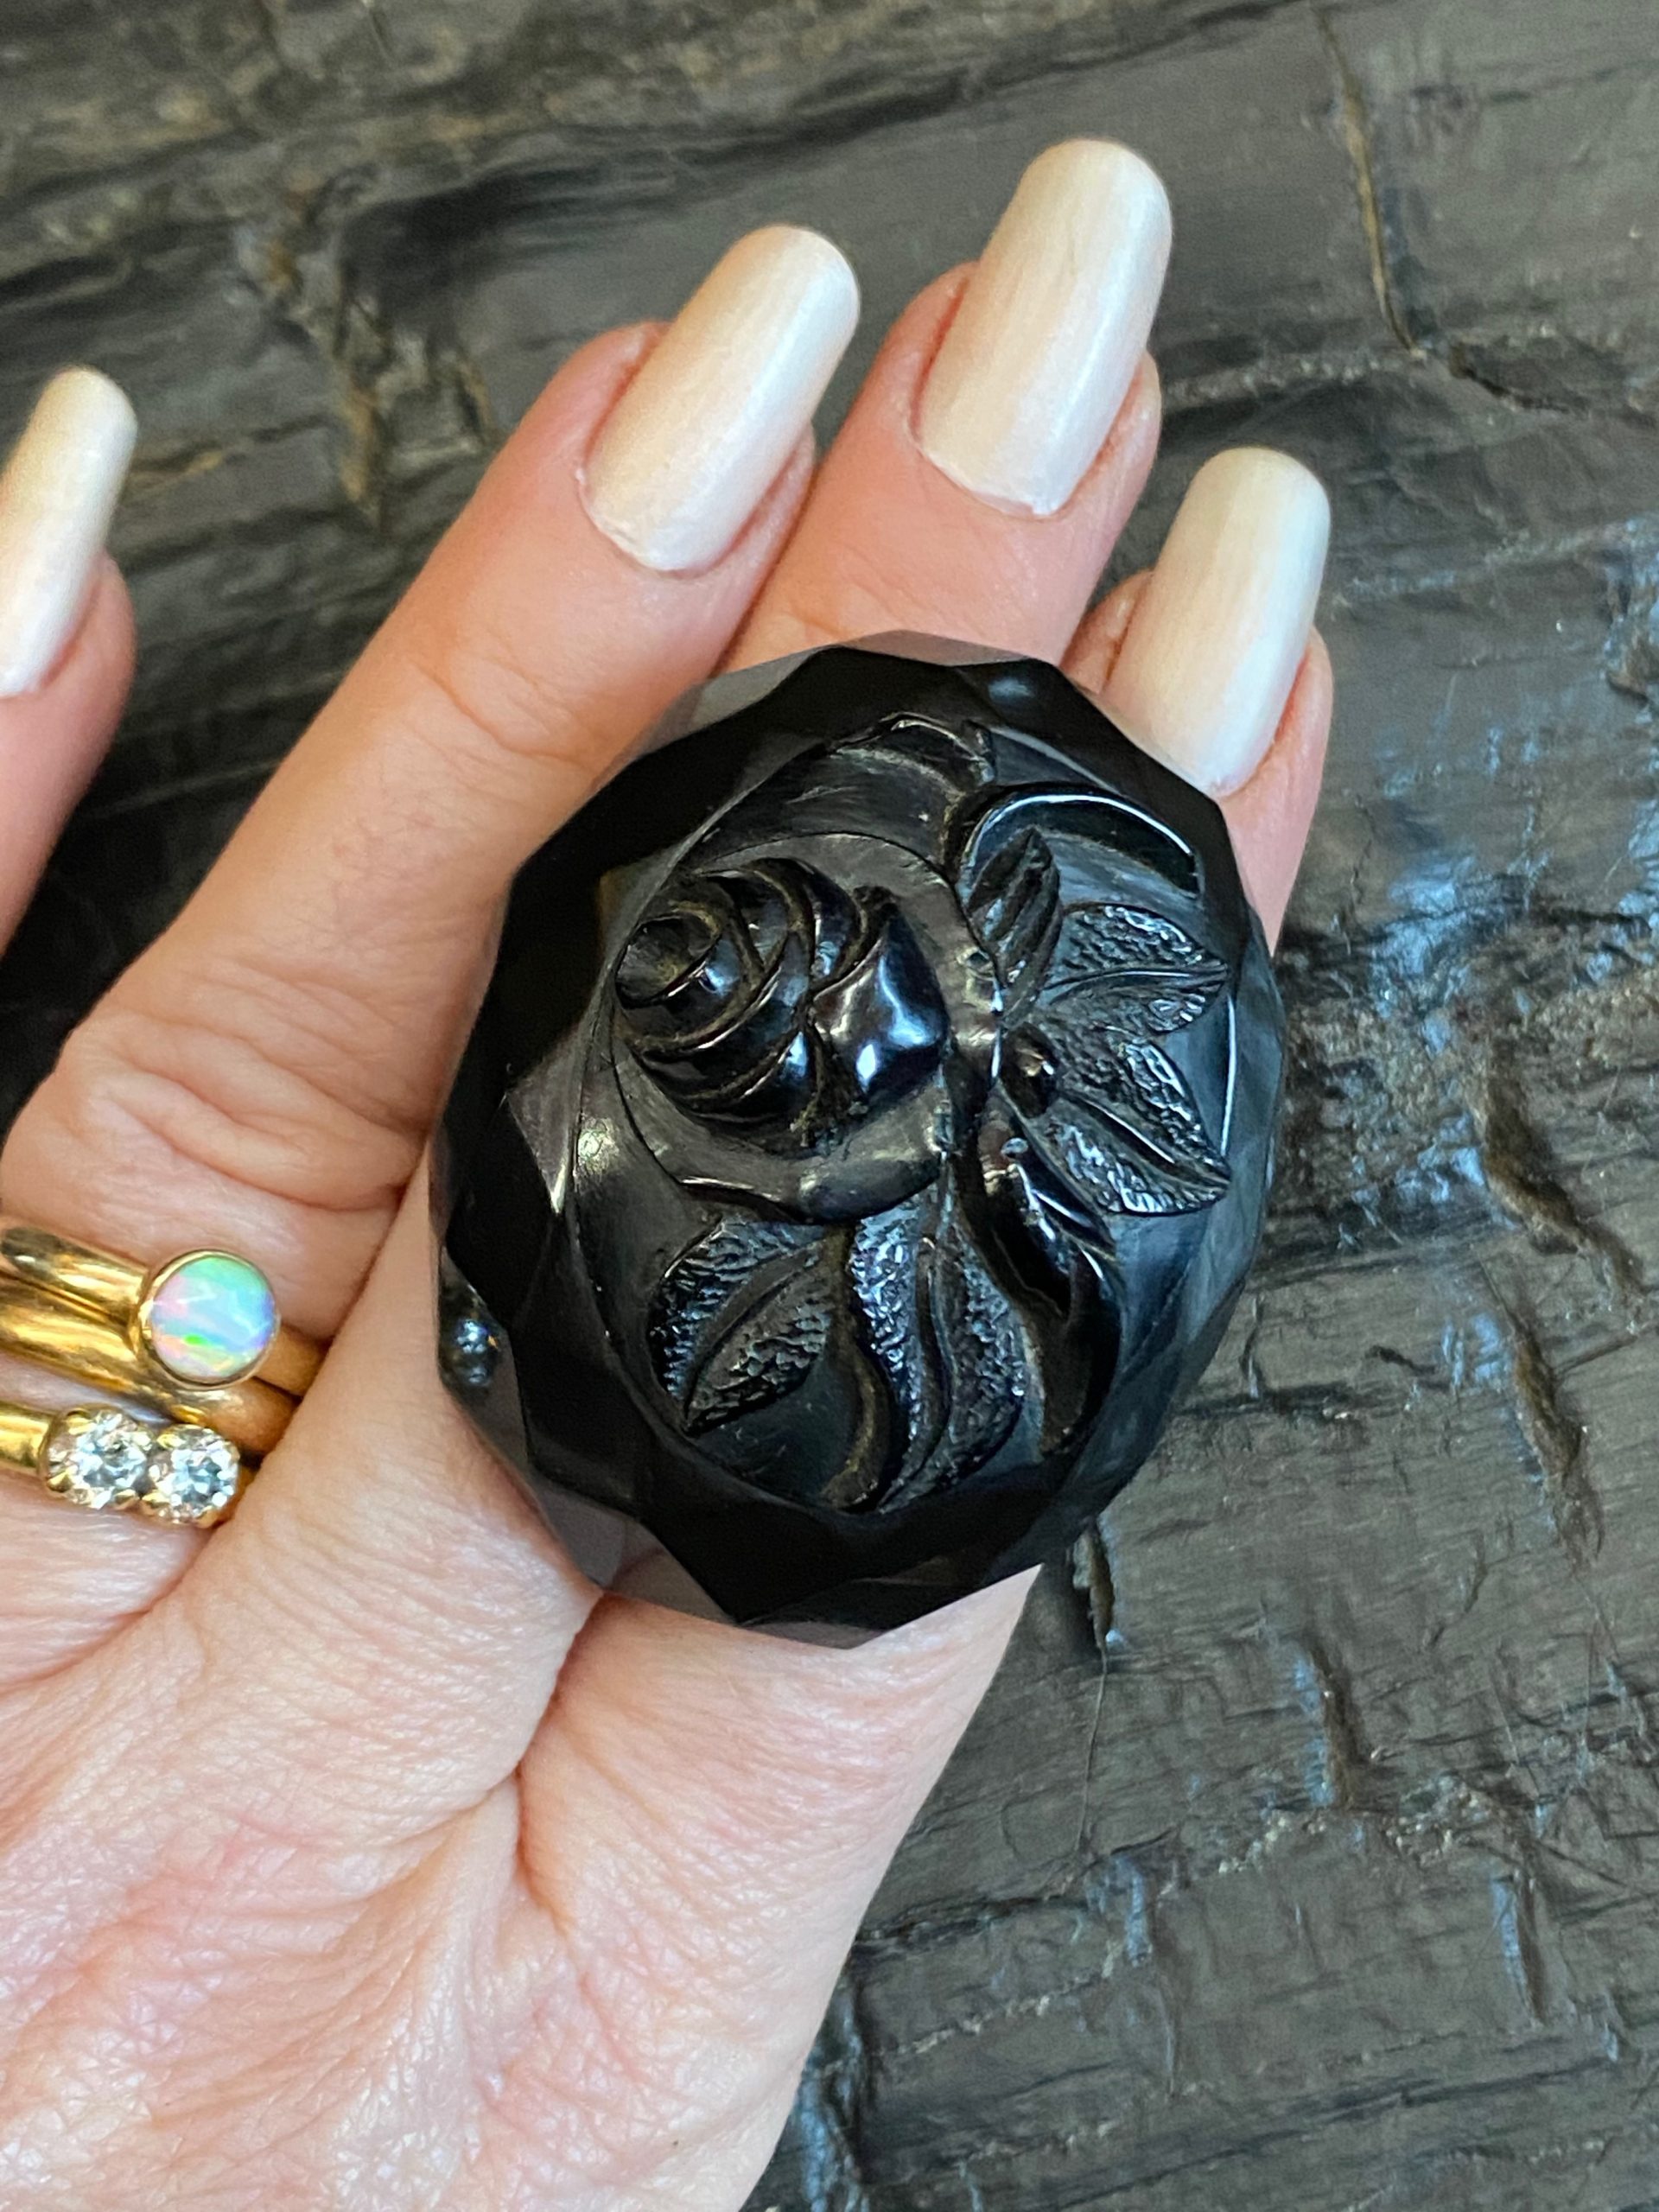 Antique Whitby Jet Brooch ” The Rose”